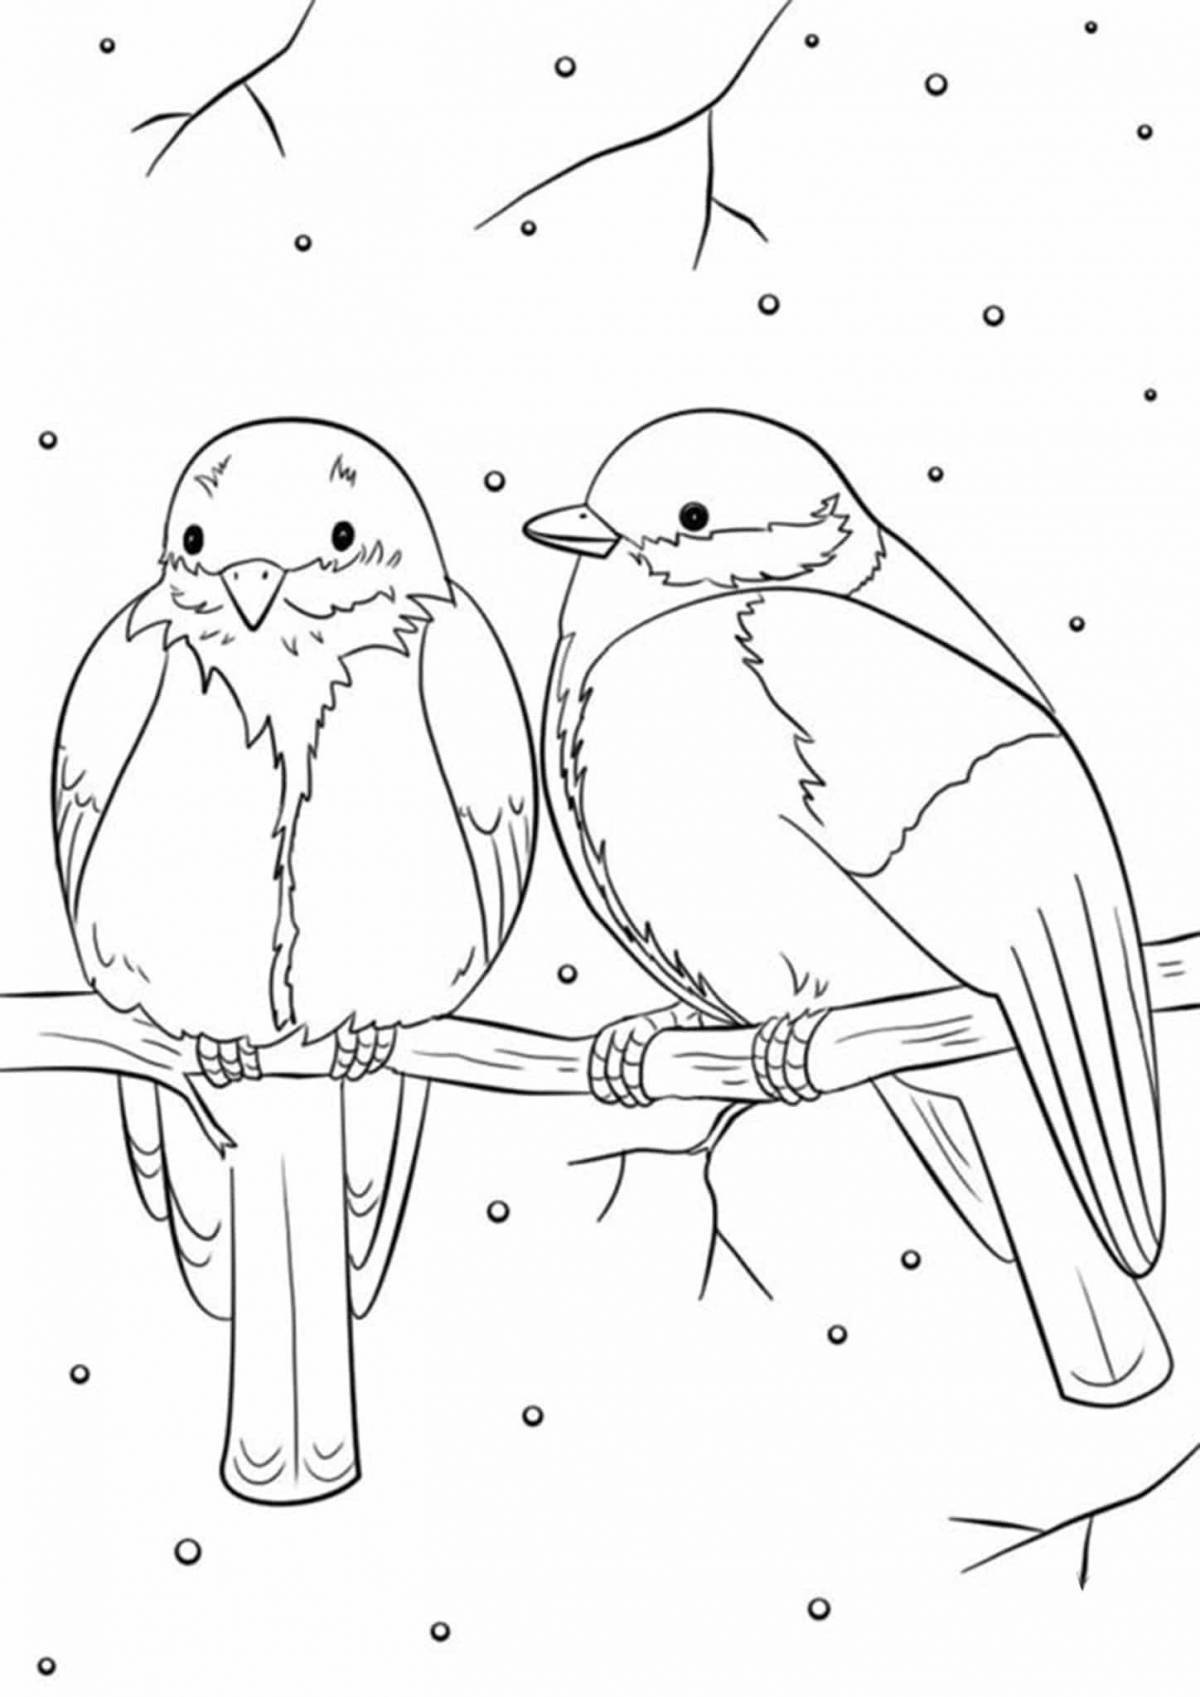 Coloring book flying birds on a branch in winter